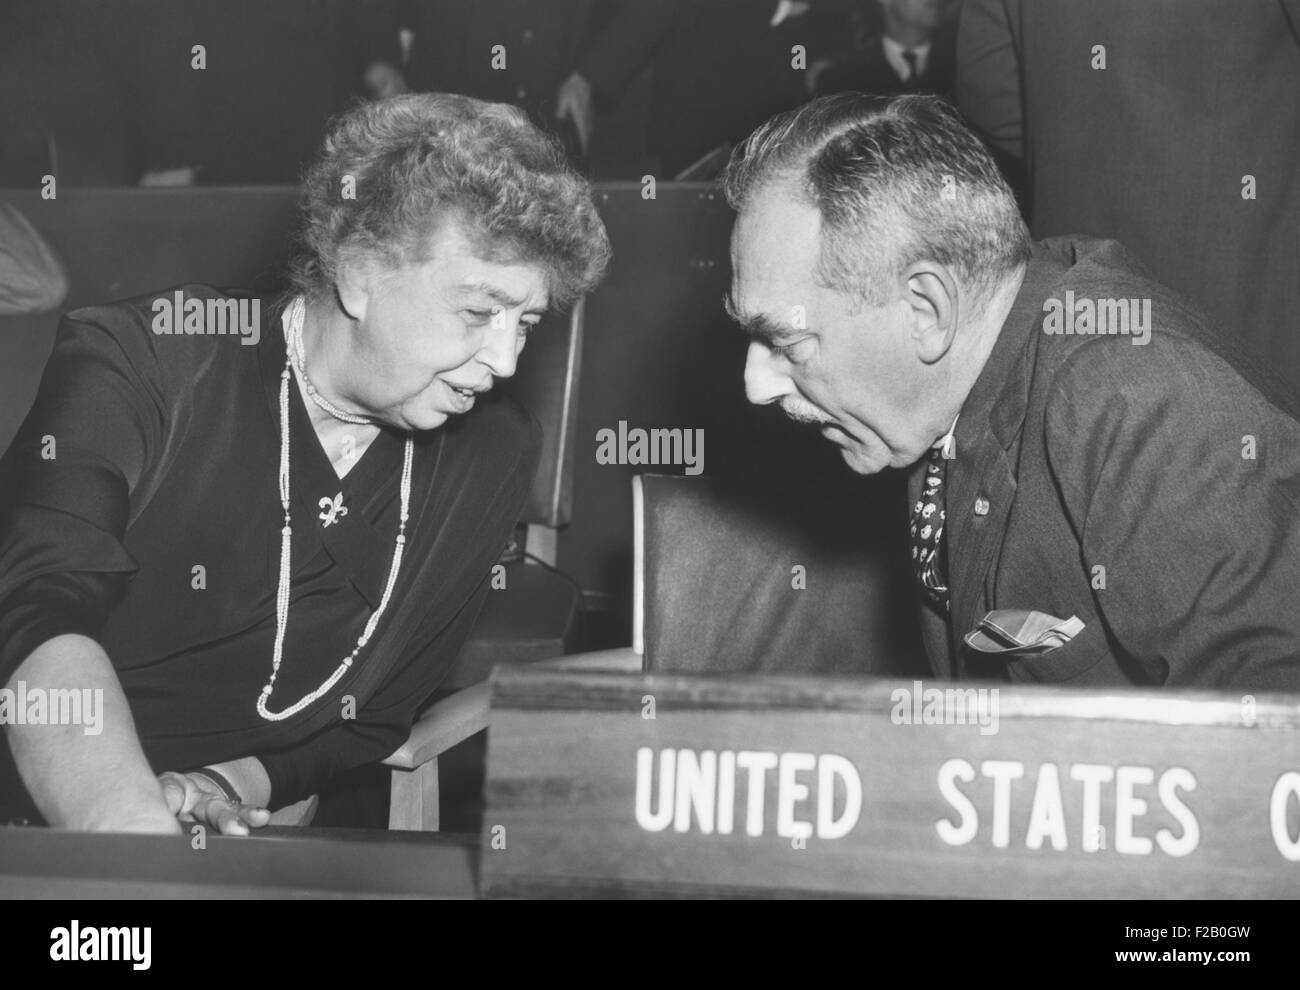 Eleanor Roosevelt and Secretary of State Dean Acheson at United Nations General Assembly in Paris. Nov. 9. 1951. President Harry Truman appointed Roosevelt to the first American delegation to the UN. She served from Dec. 31, 1945, until Dec. 31, 1952, (CSU 2015 9 1123) Stock Photo